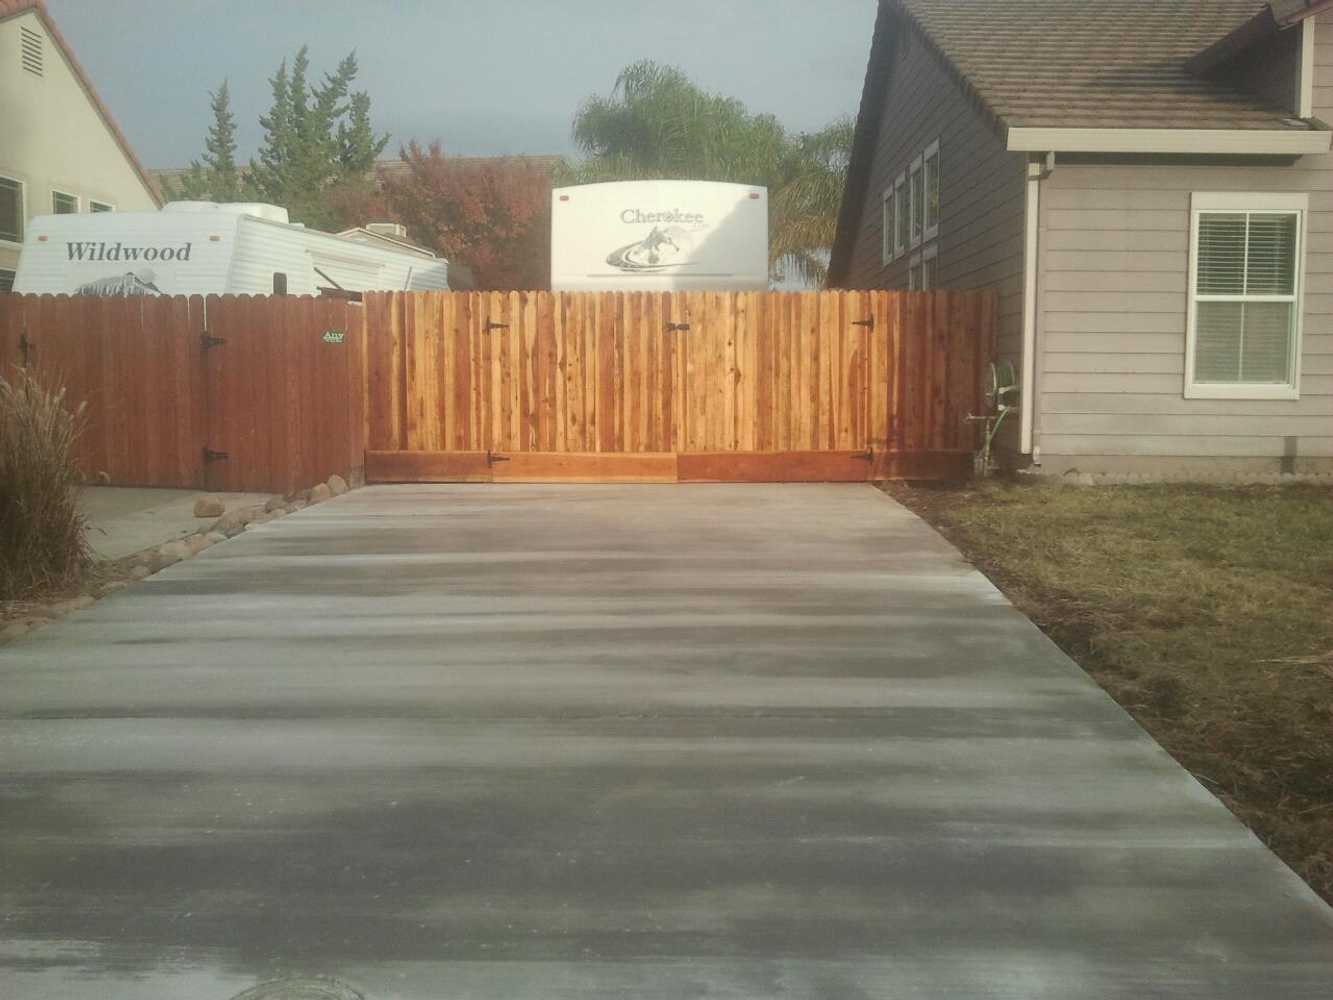 Photo(s) from A-2-Z Landscaping